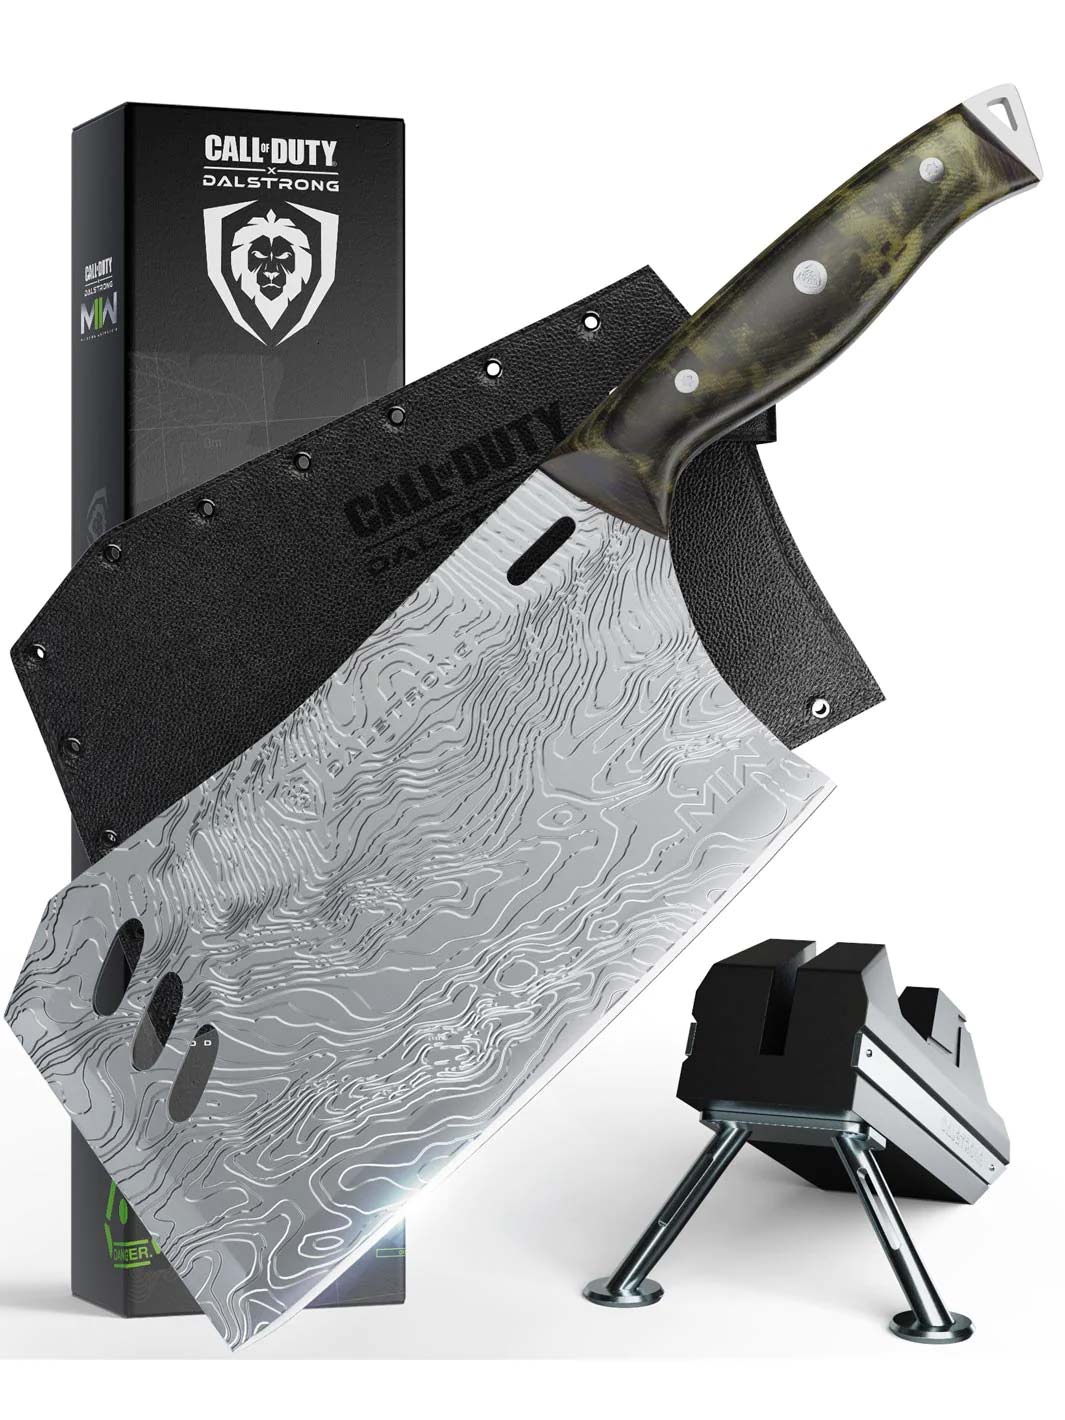 Cleaver Knife with Stand | Obliterator | Call of Duty © Edition | EXCLUSIVE COLLECTOR SET | Dalstrong ©